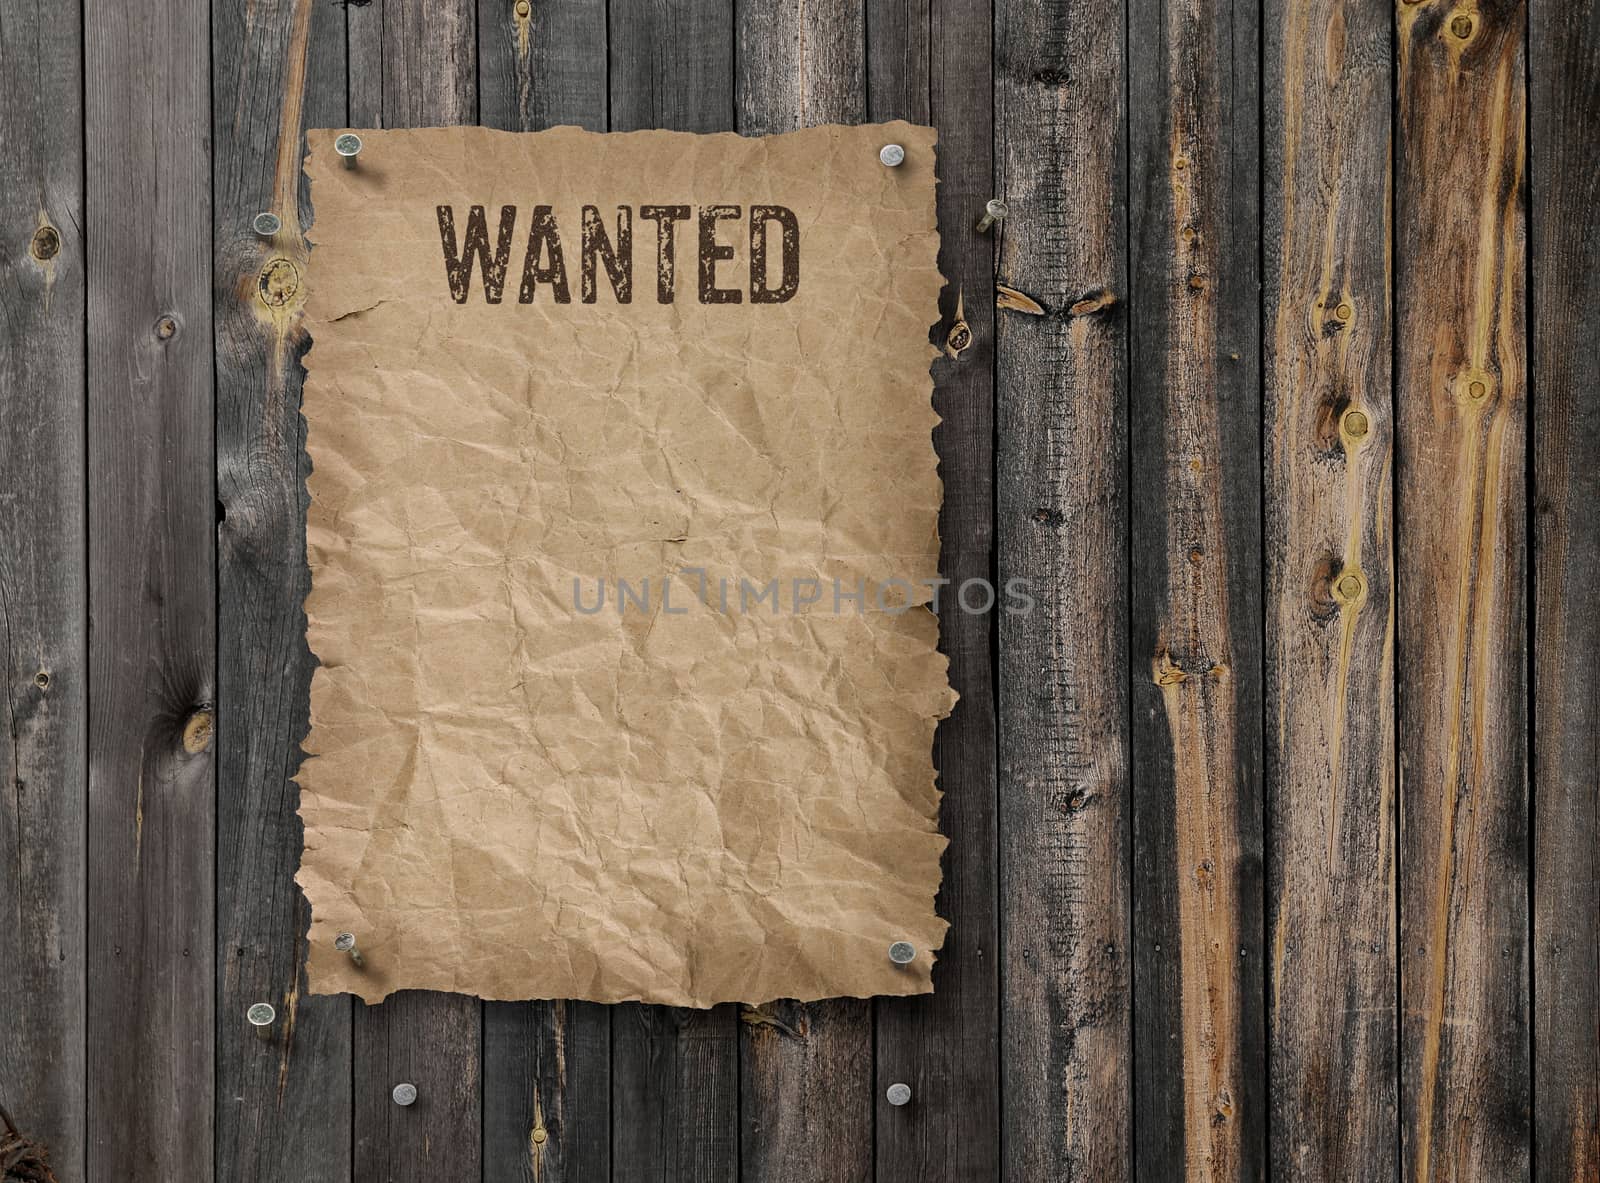 Wild West wanted poster on weathered plank wood wall